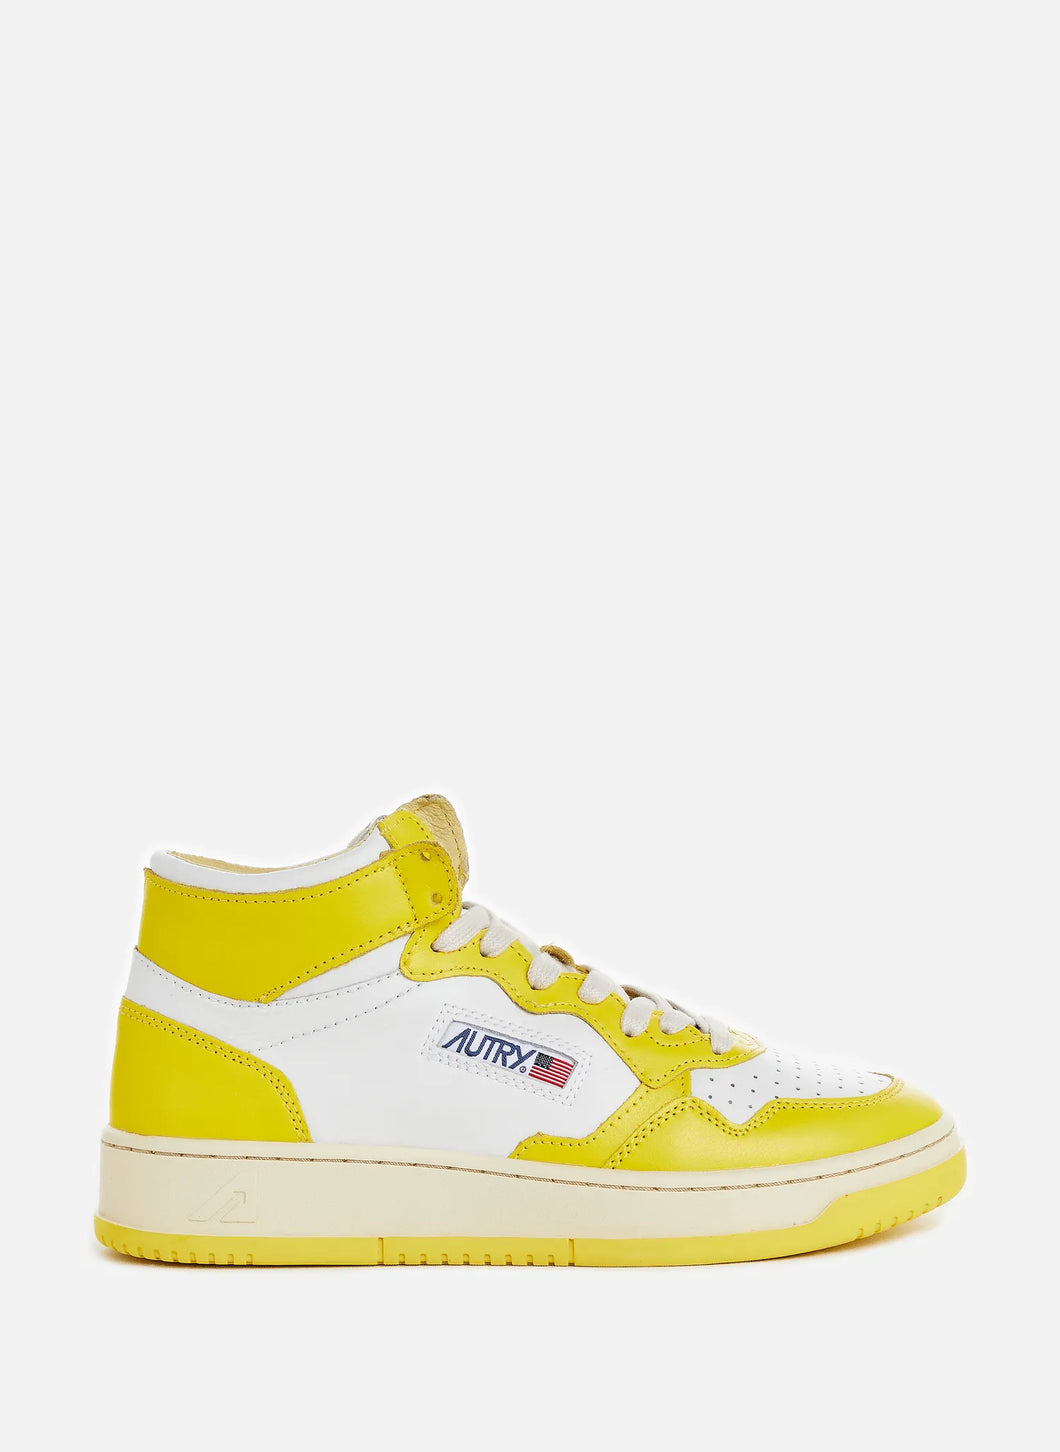 AUTRY Baskets Mid Cuir Yellow